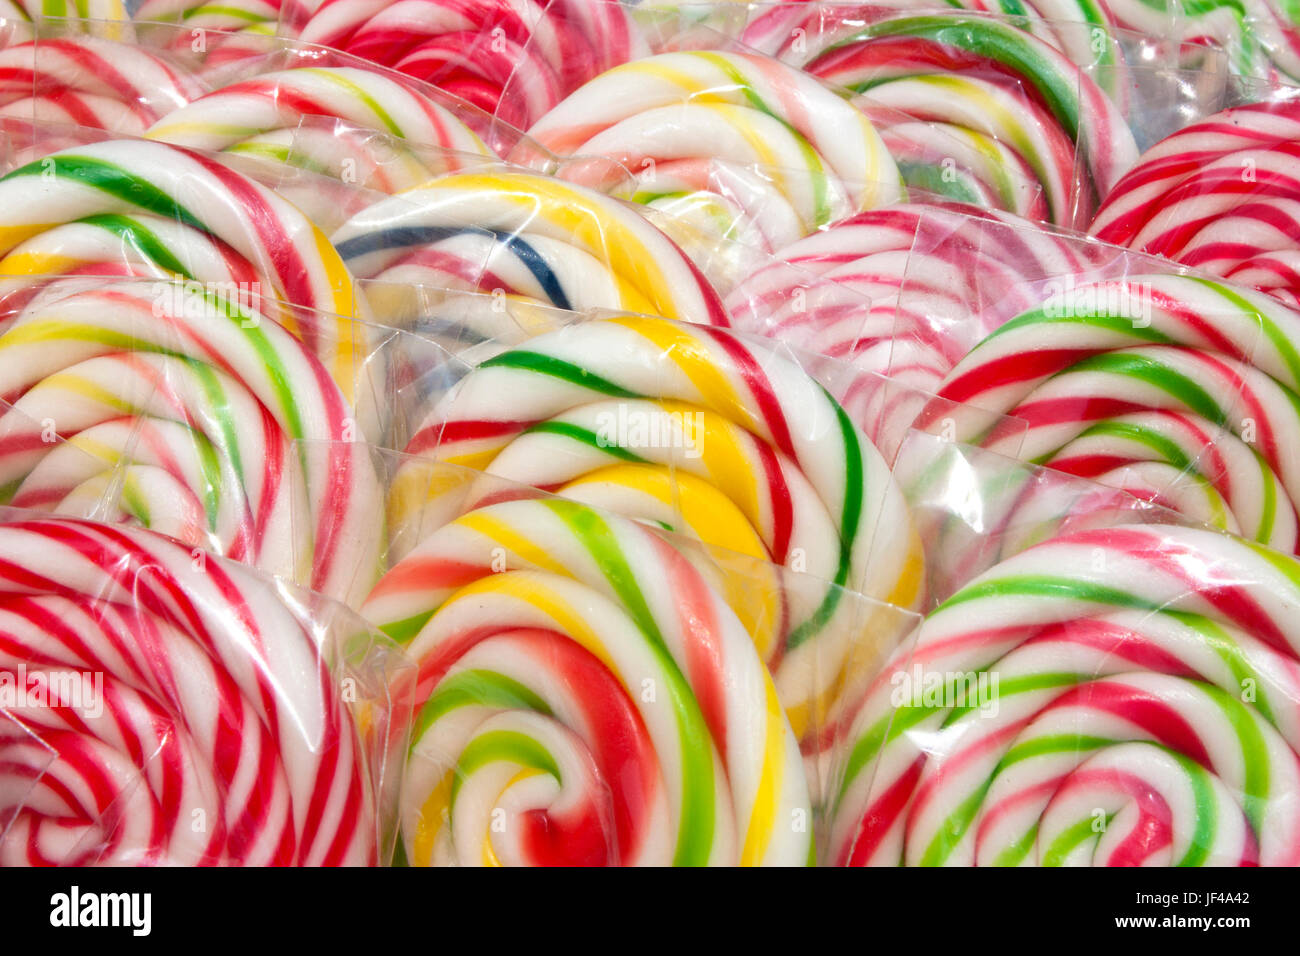 Colorful whirly lolly pops wrapped in cellophane, detail Stock Photo